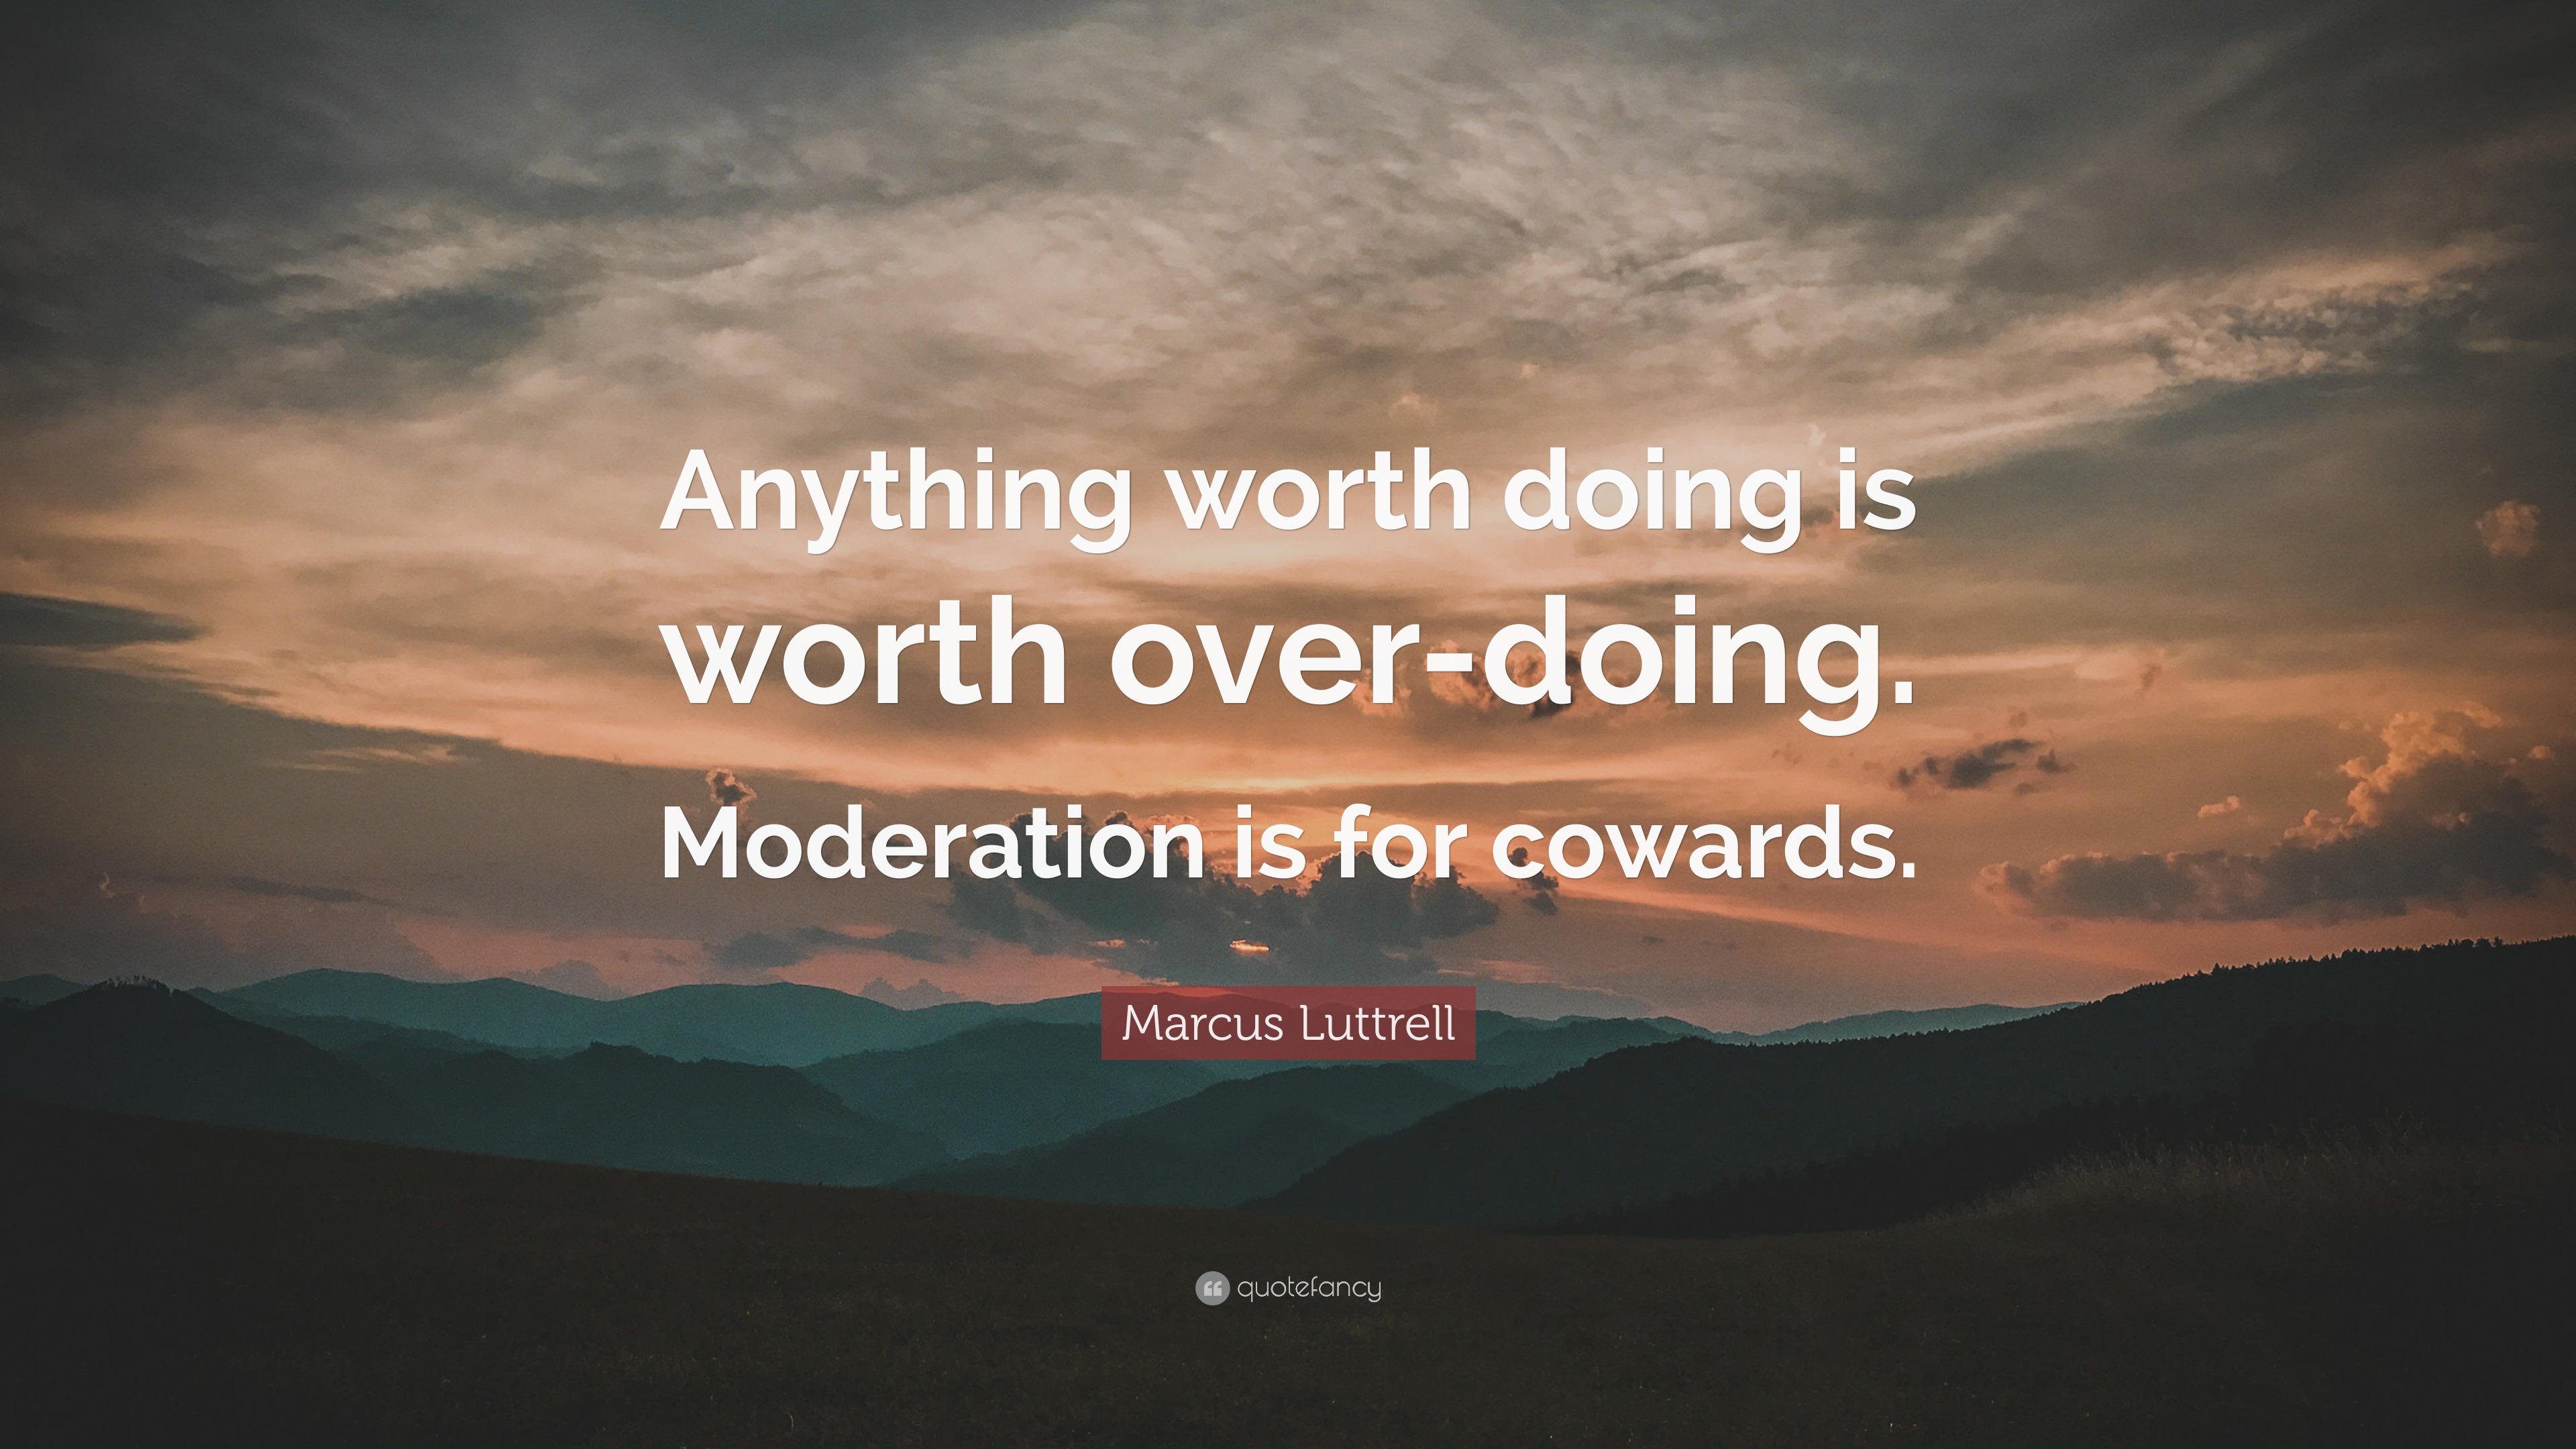 Marcus Luttrell Quote: "Anything worth doing is worth over-doing. Moderation is for cowards ...